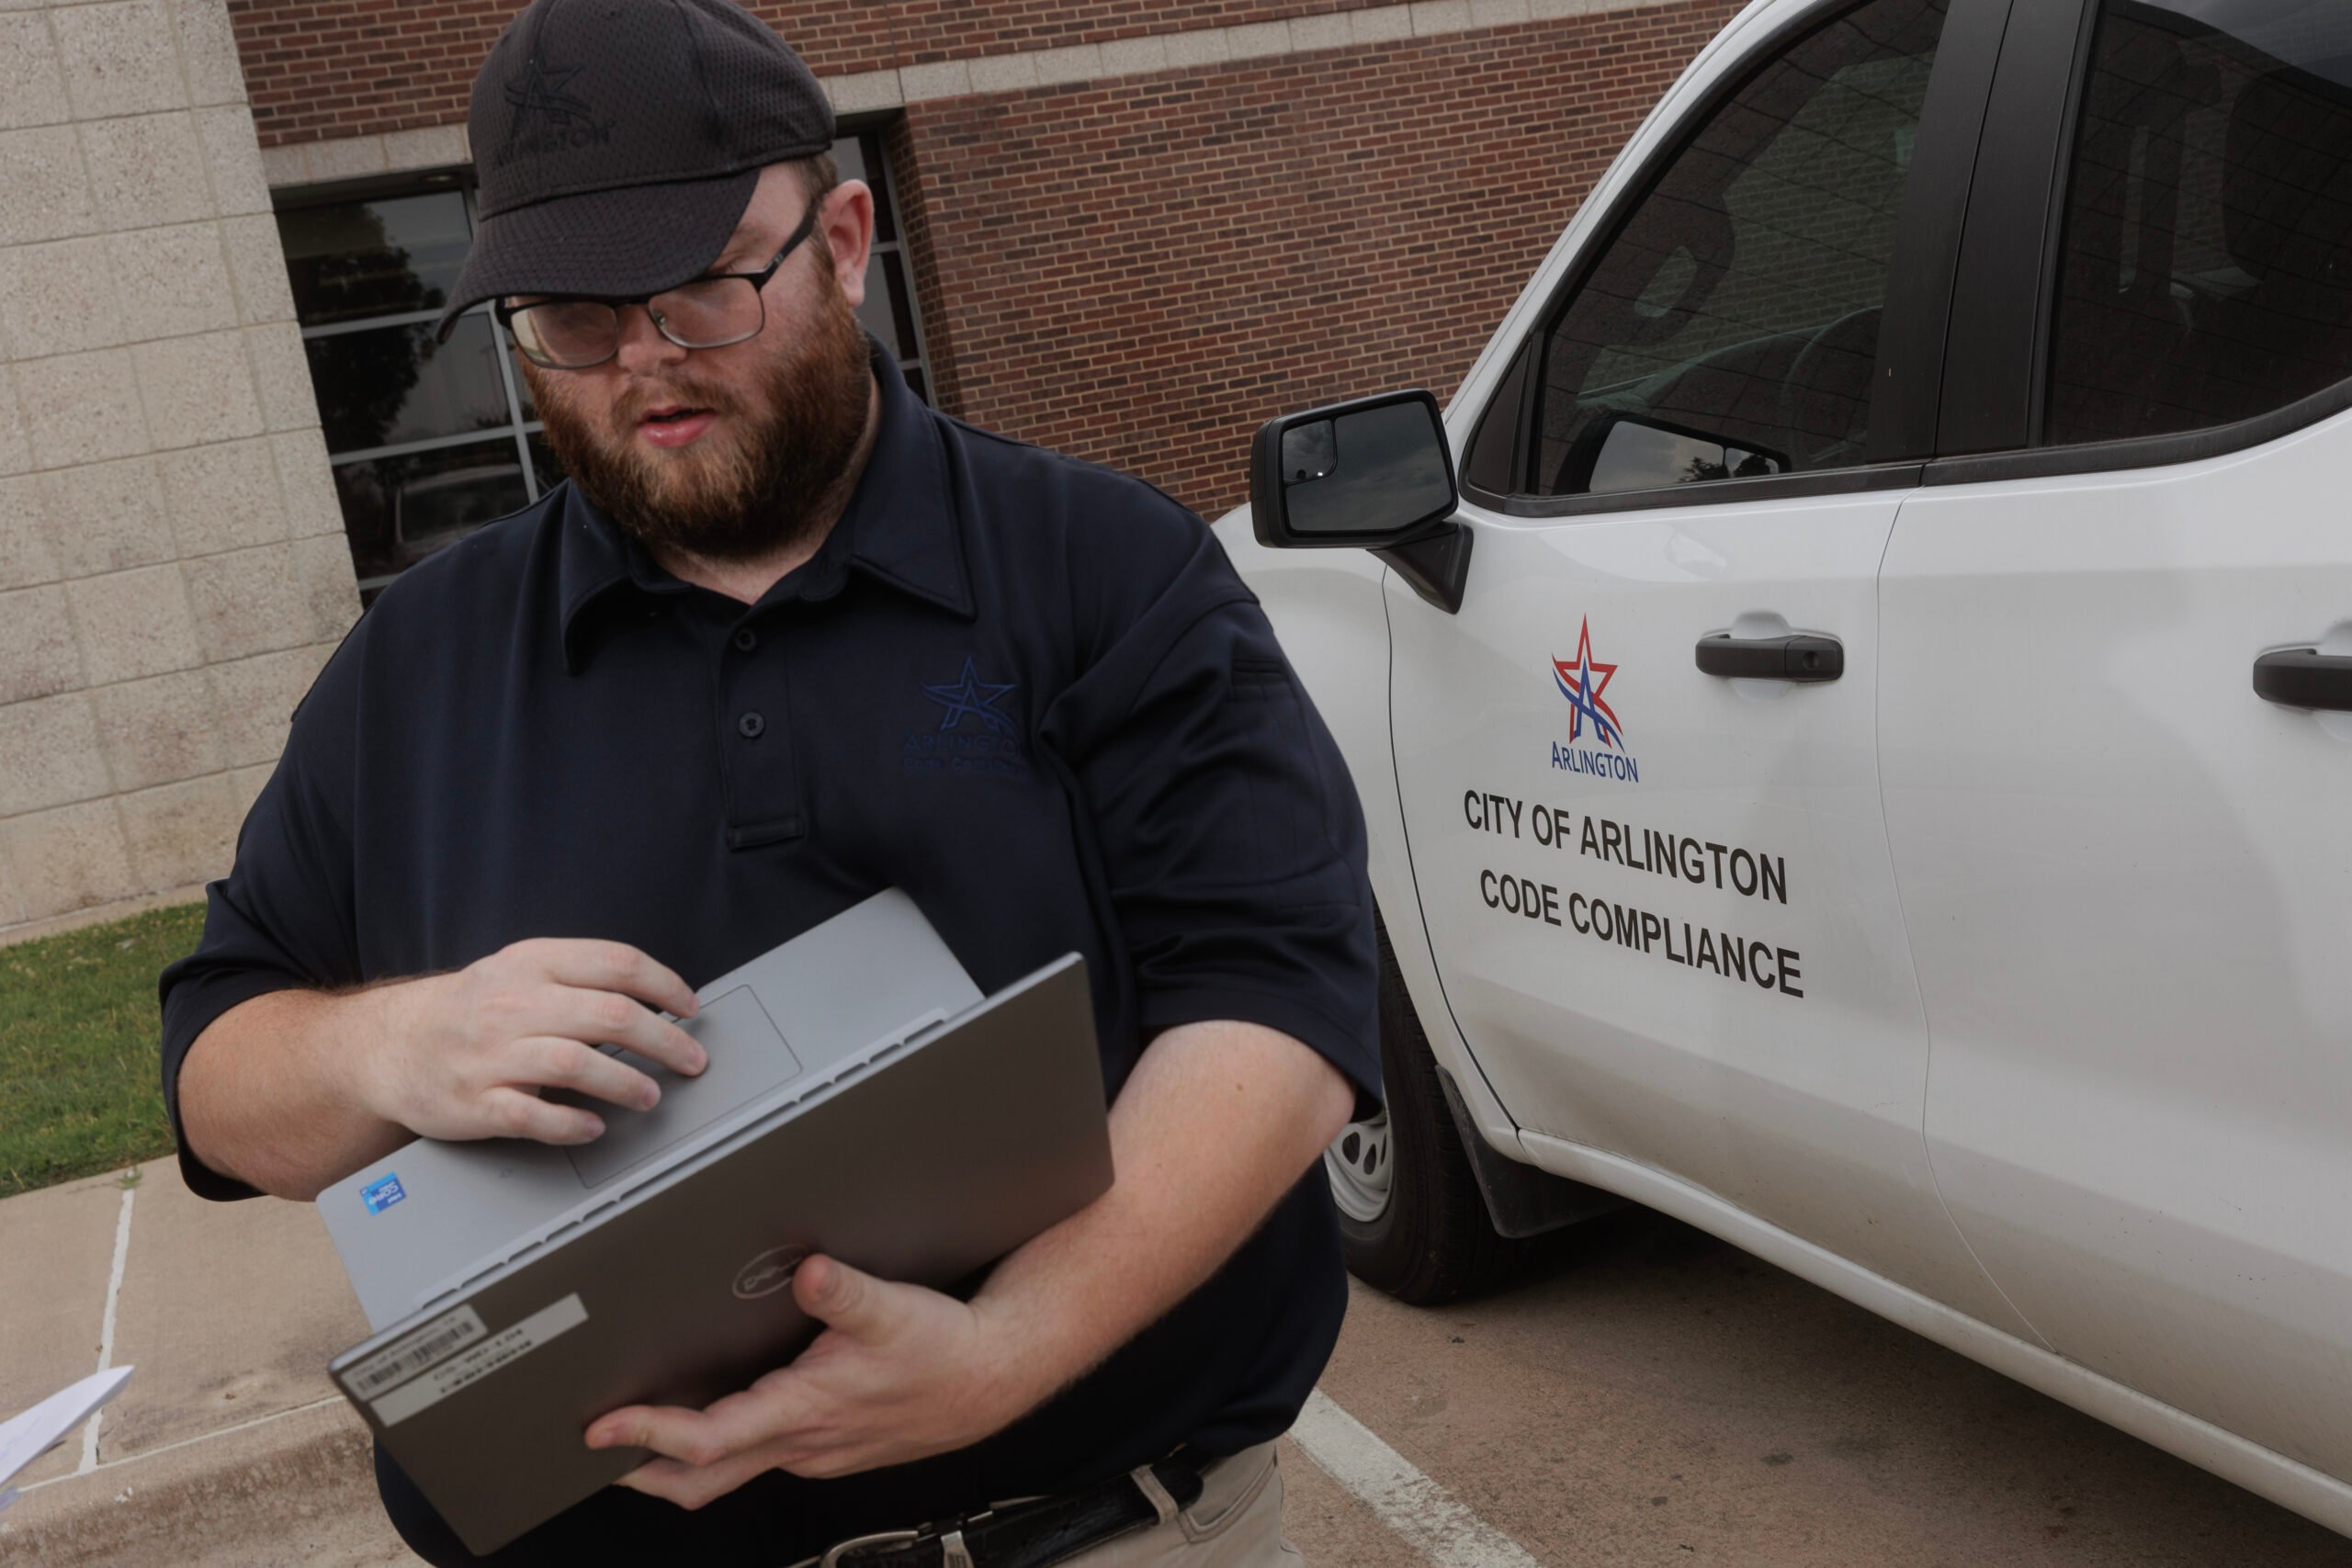 A thickly bearded man in a black cap and black polo scrolls through a laptop held in his otherh and, while standing by a City of Arlington Code Compliance enforcement vehicle.